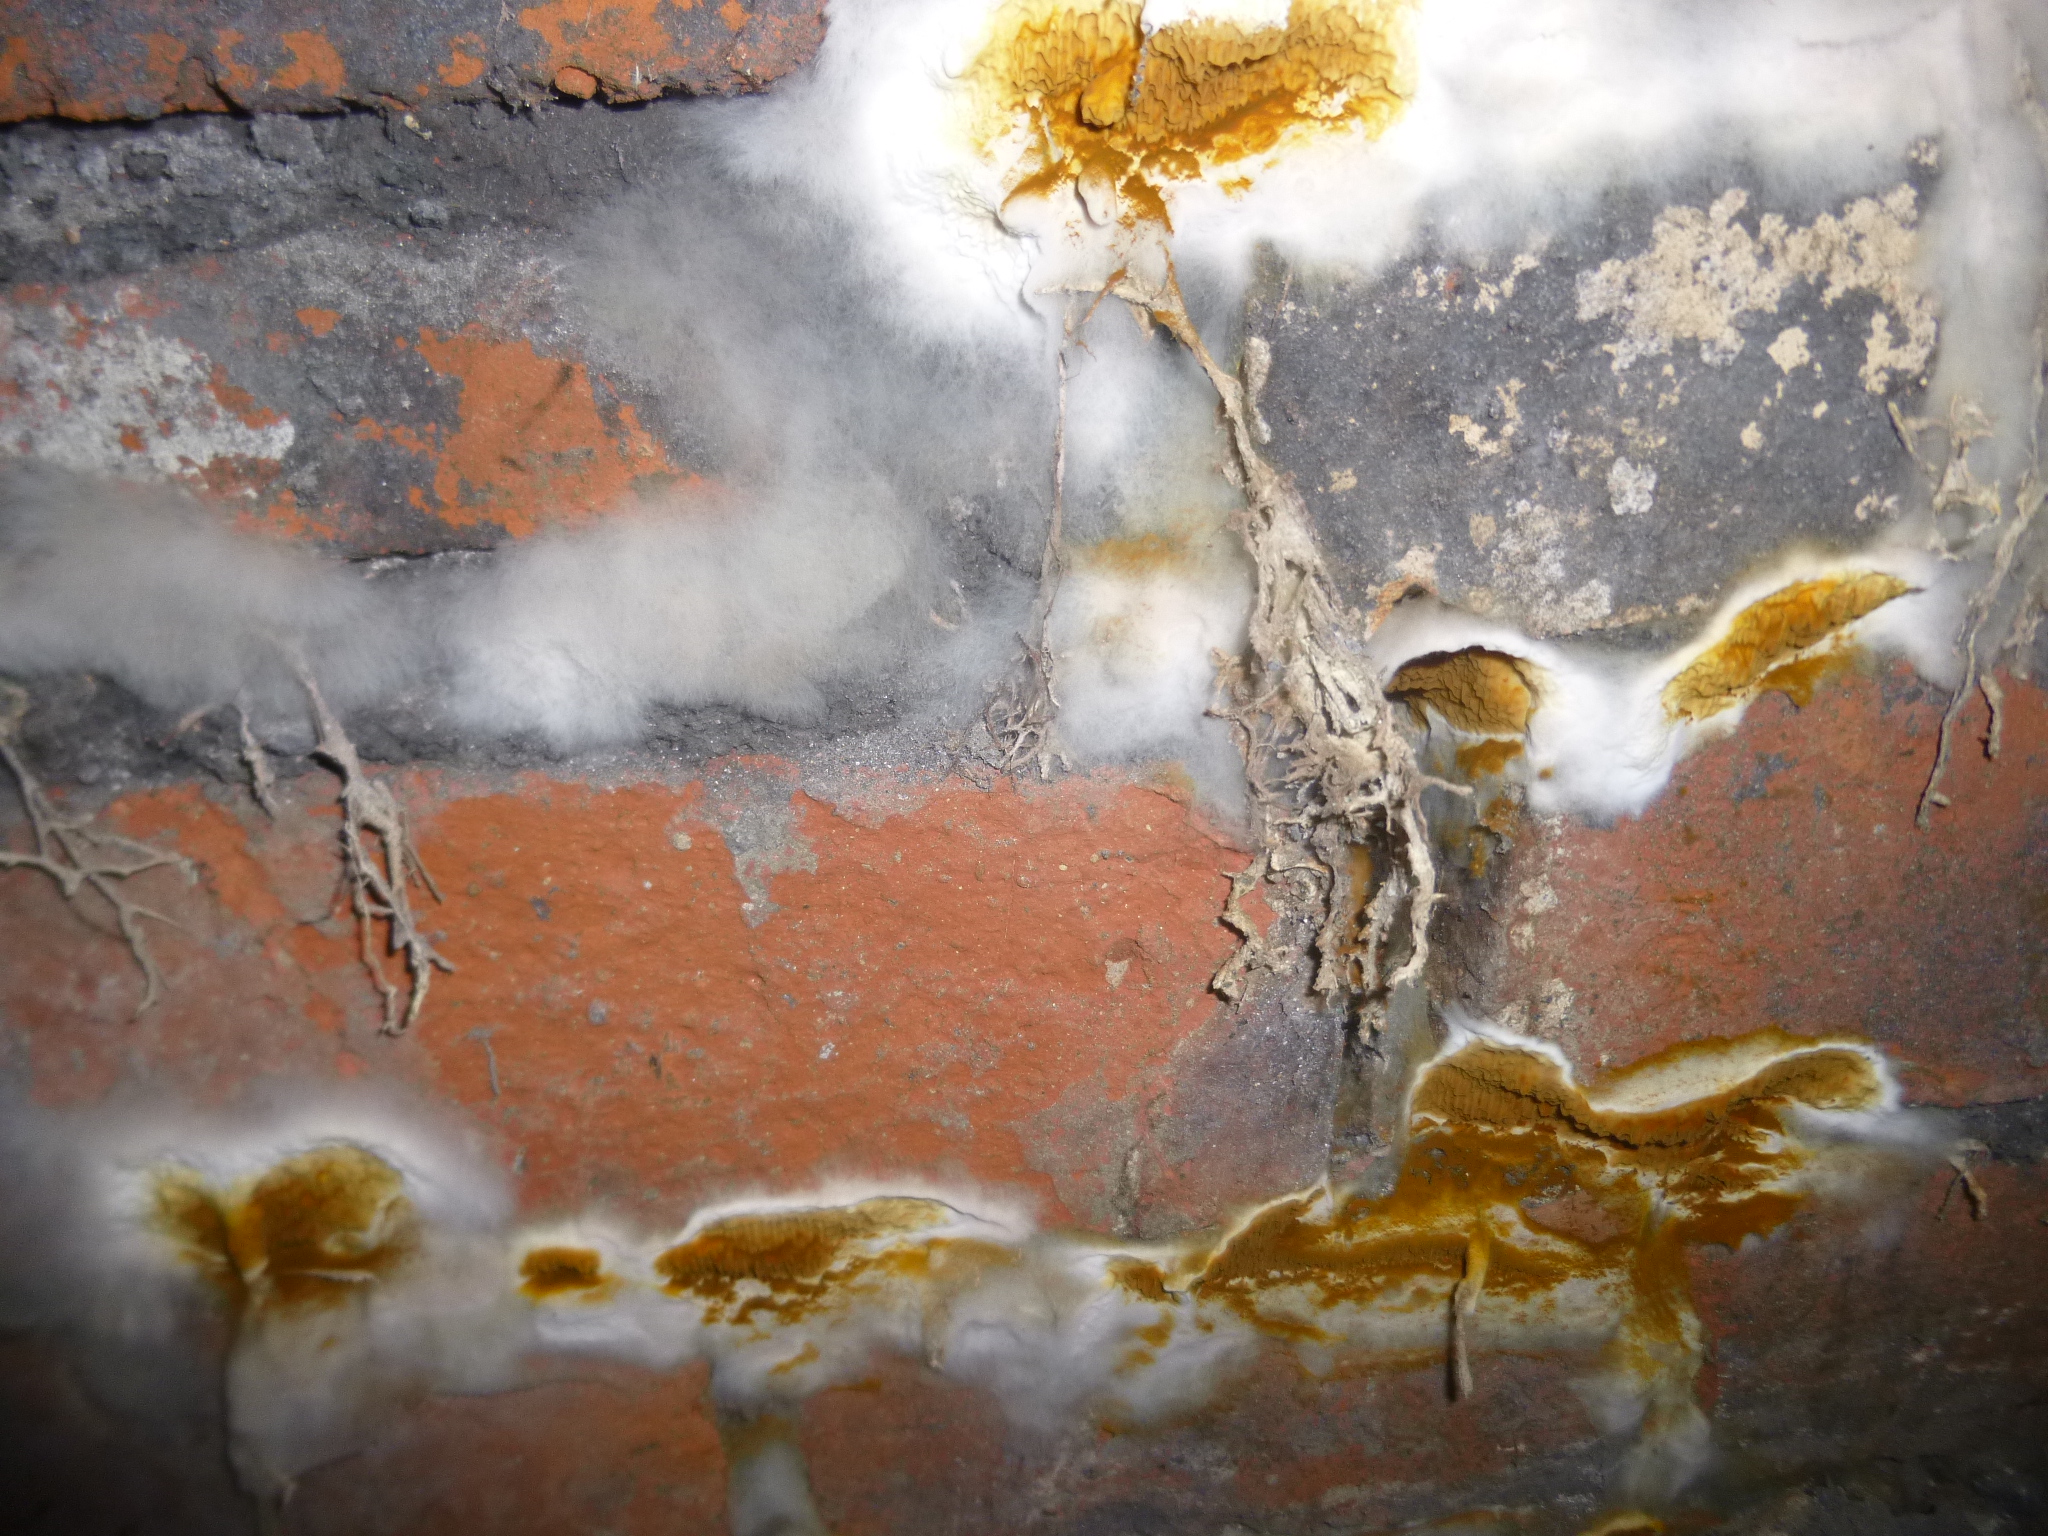 Dry Rot attacks can spread through organic materials such as Mortar.